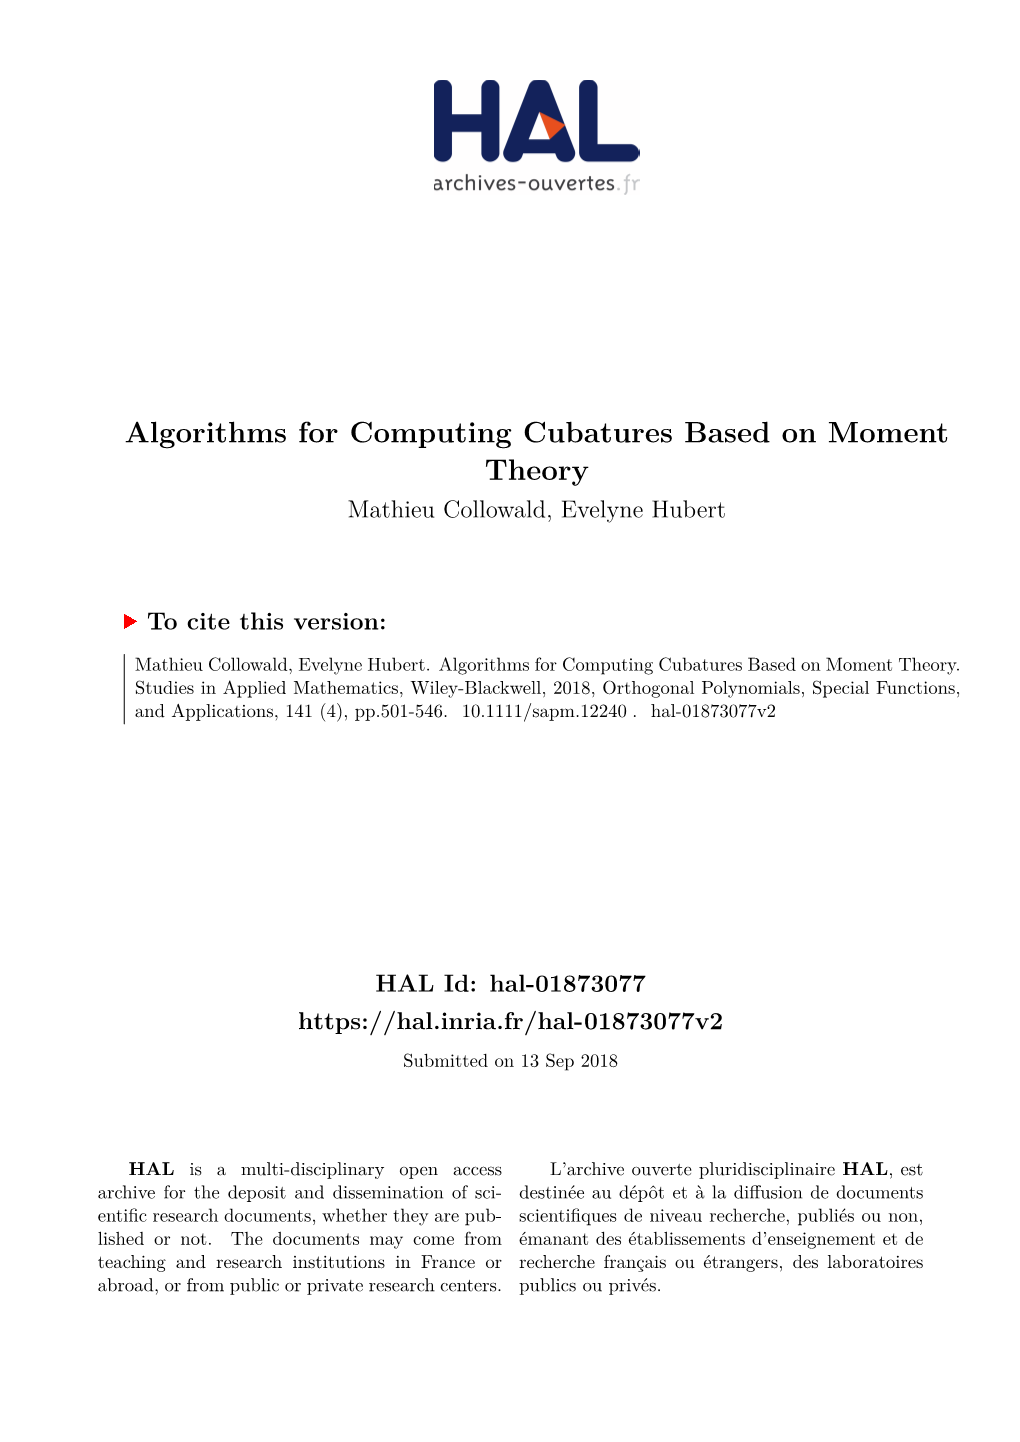 Algorithms for Computing Cubatures Based on Moment Theory Mathieu Collowald, Evelyne Hubert